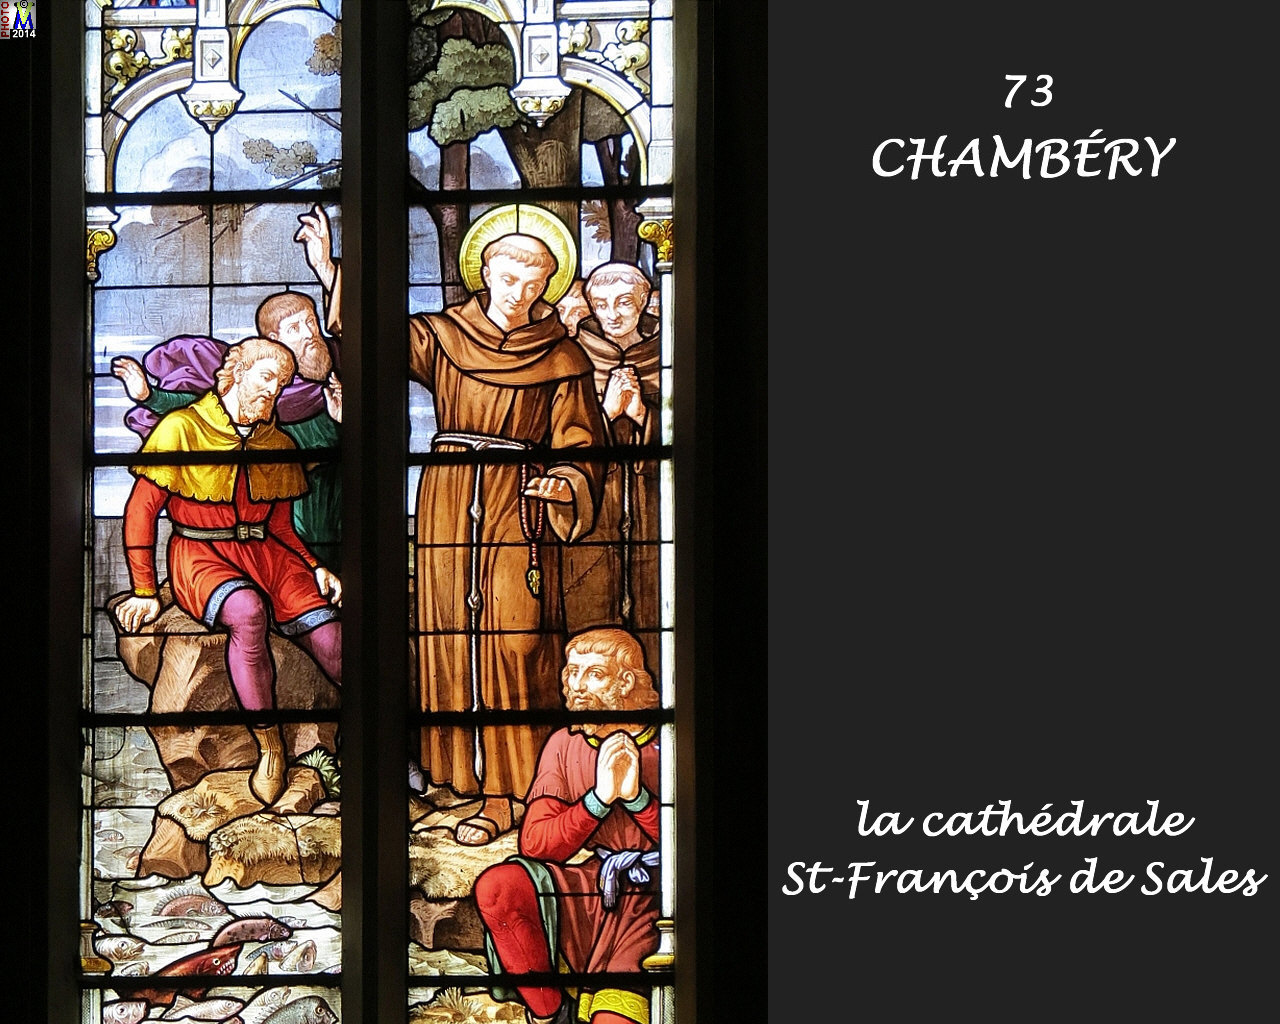 73CHAMBERY_cathedrale_214.jpg